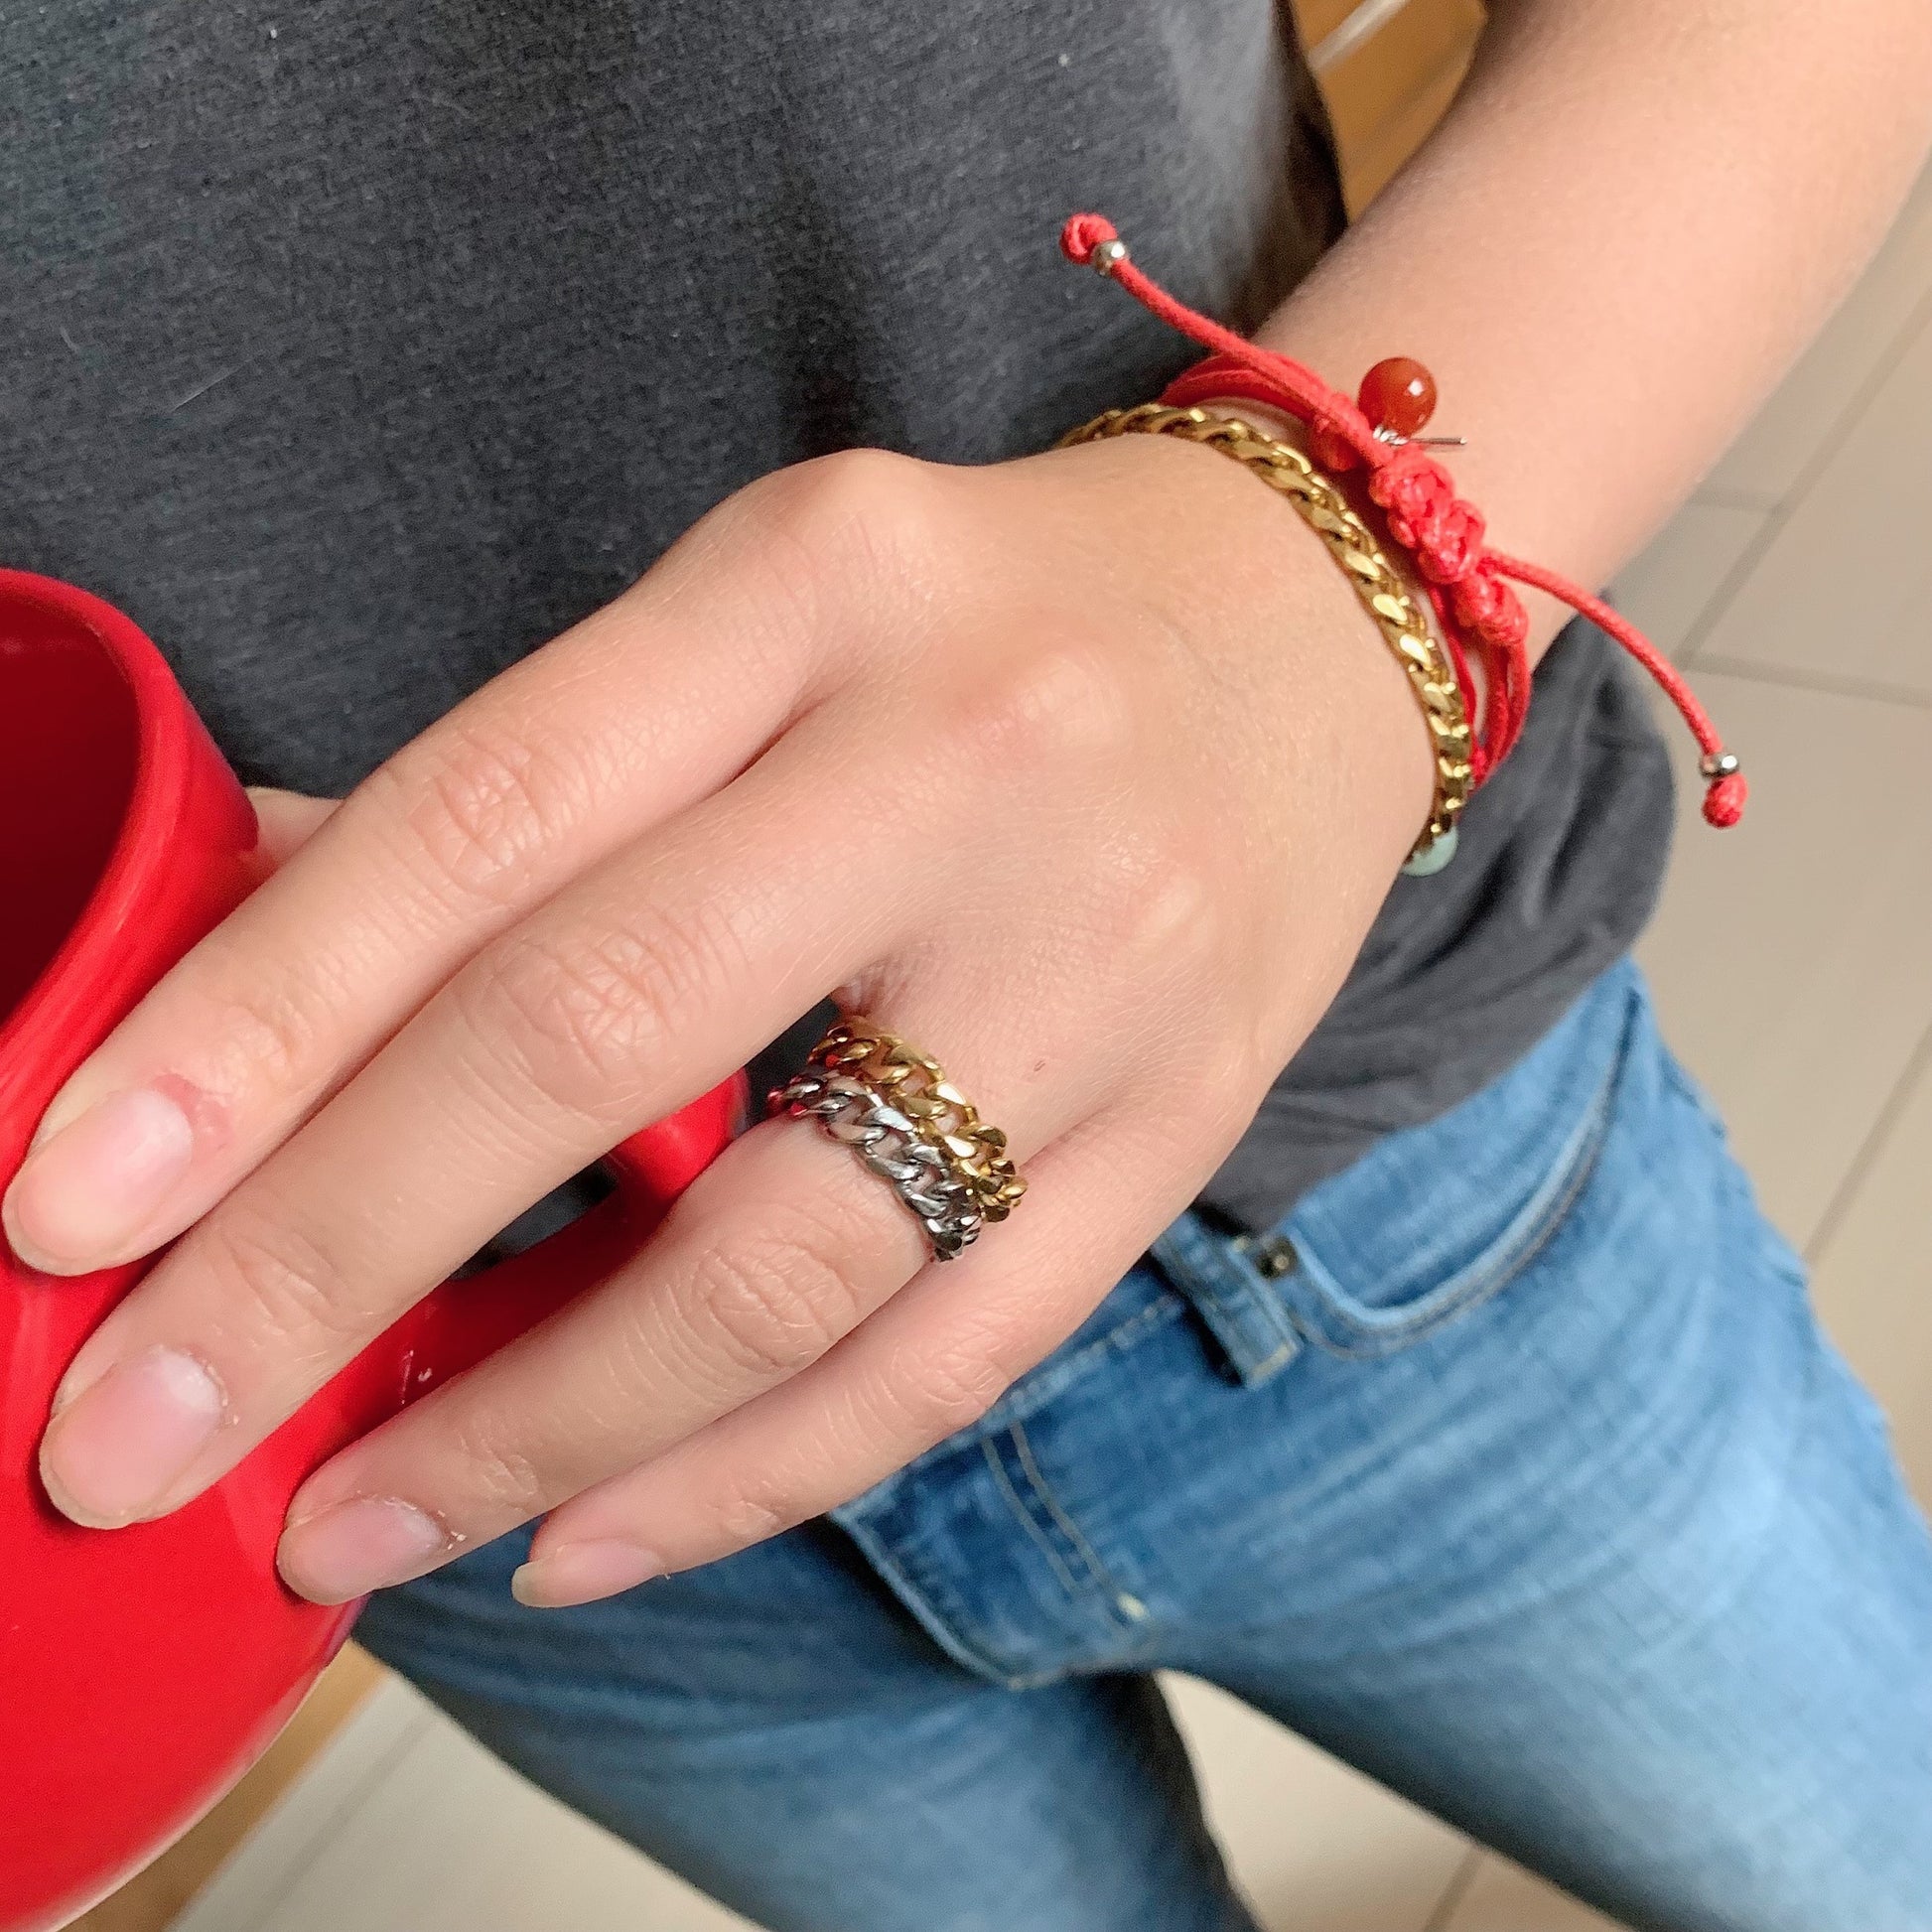 Ring - Cohen Ring | Cuban Chain Link gold and high polish staced with Cuban Chain Link Bracelet, Red String of Destiny with Red Carnelian